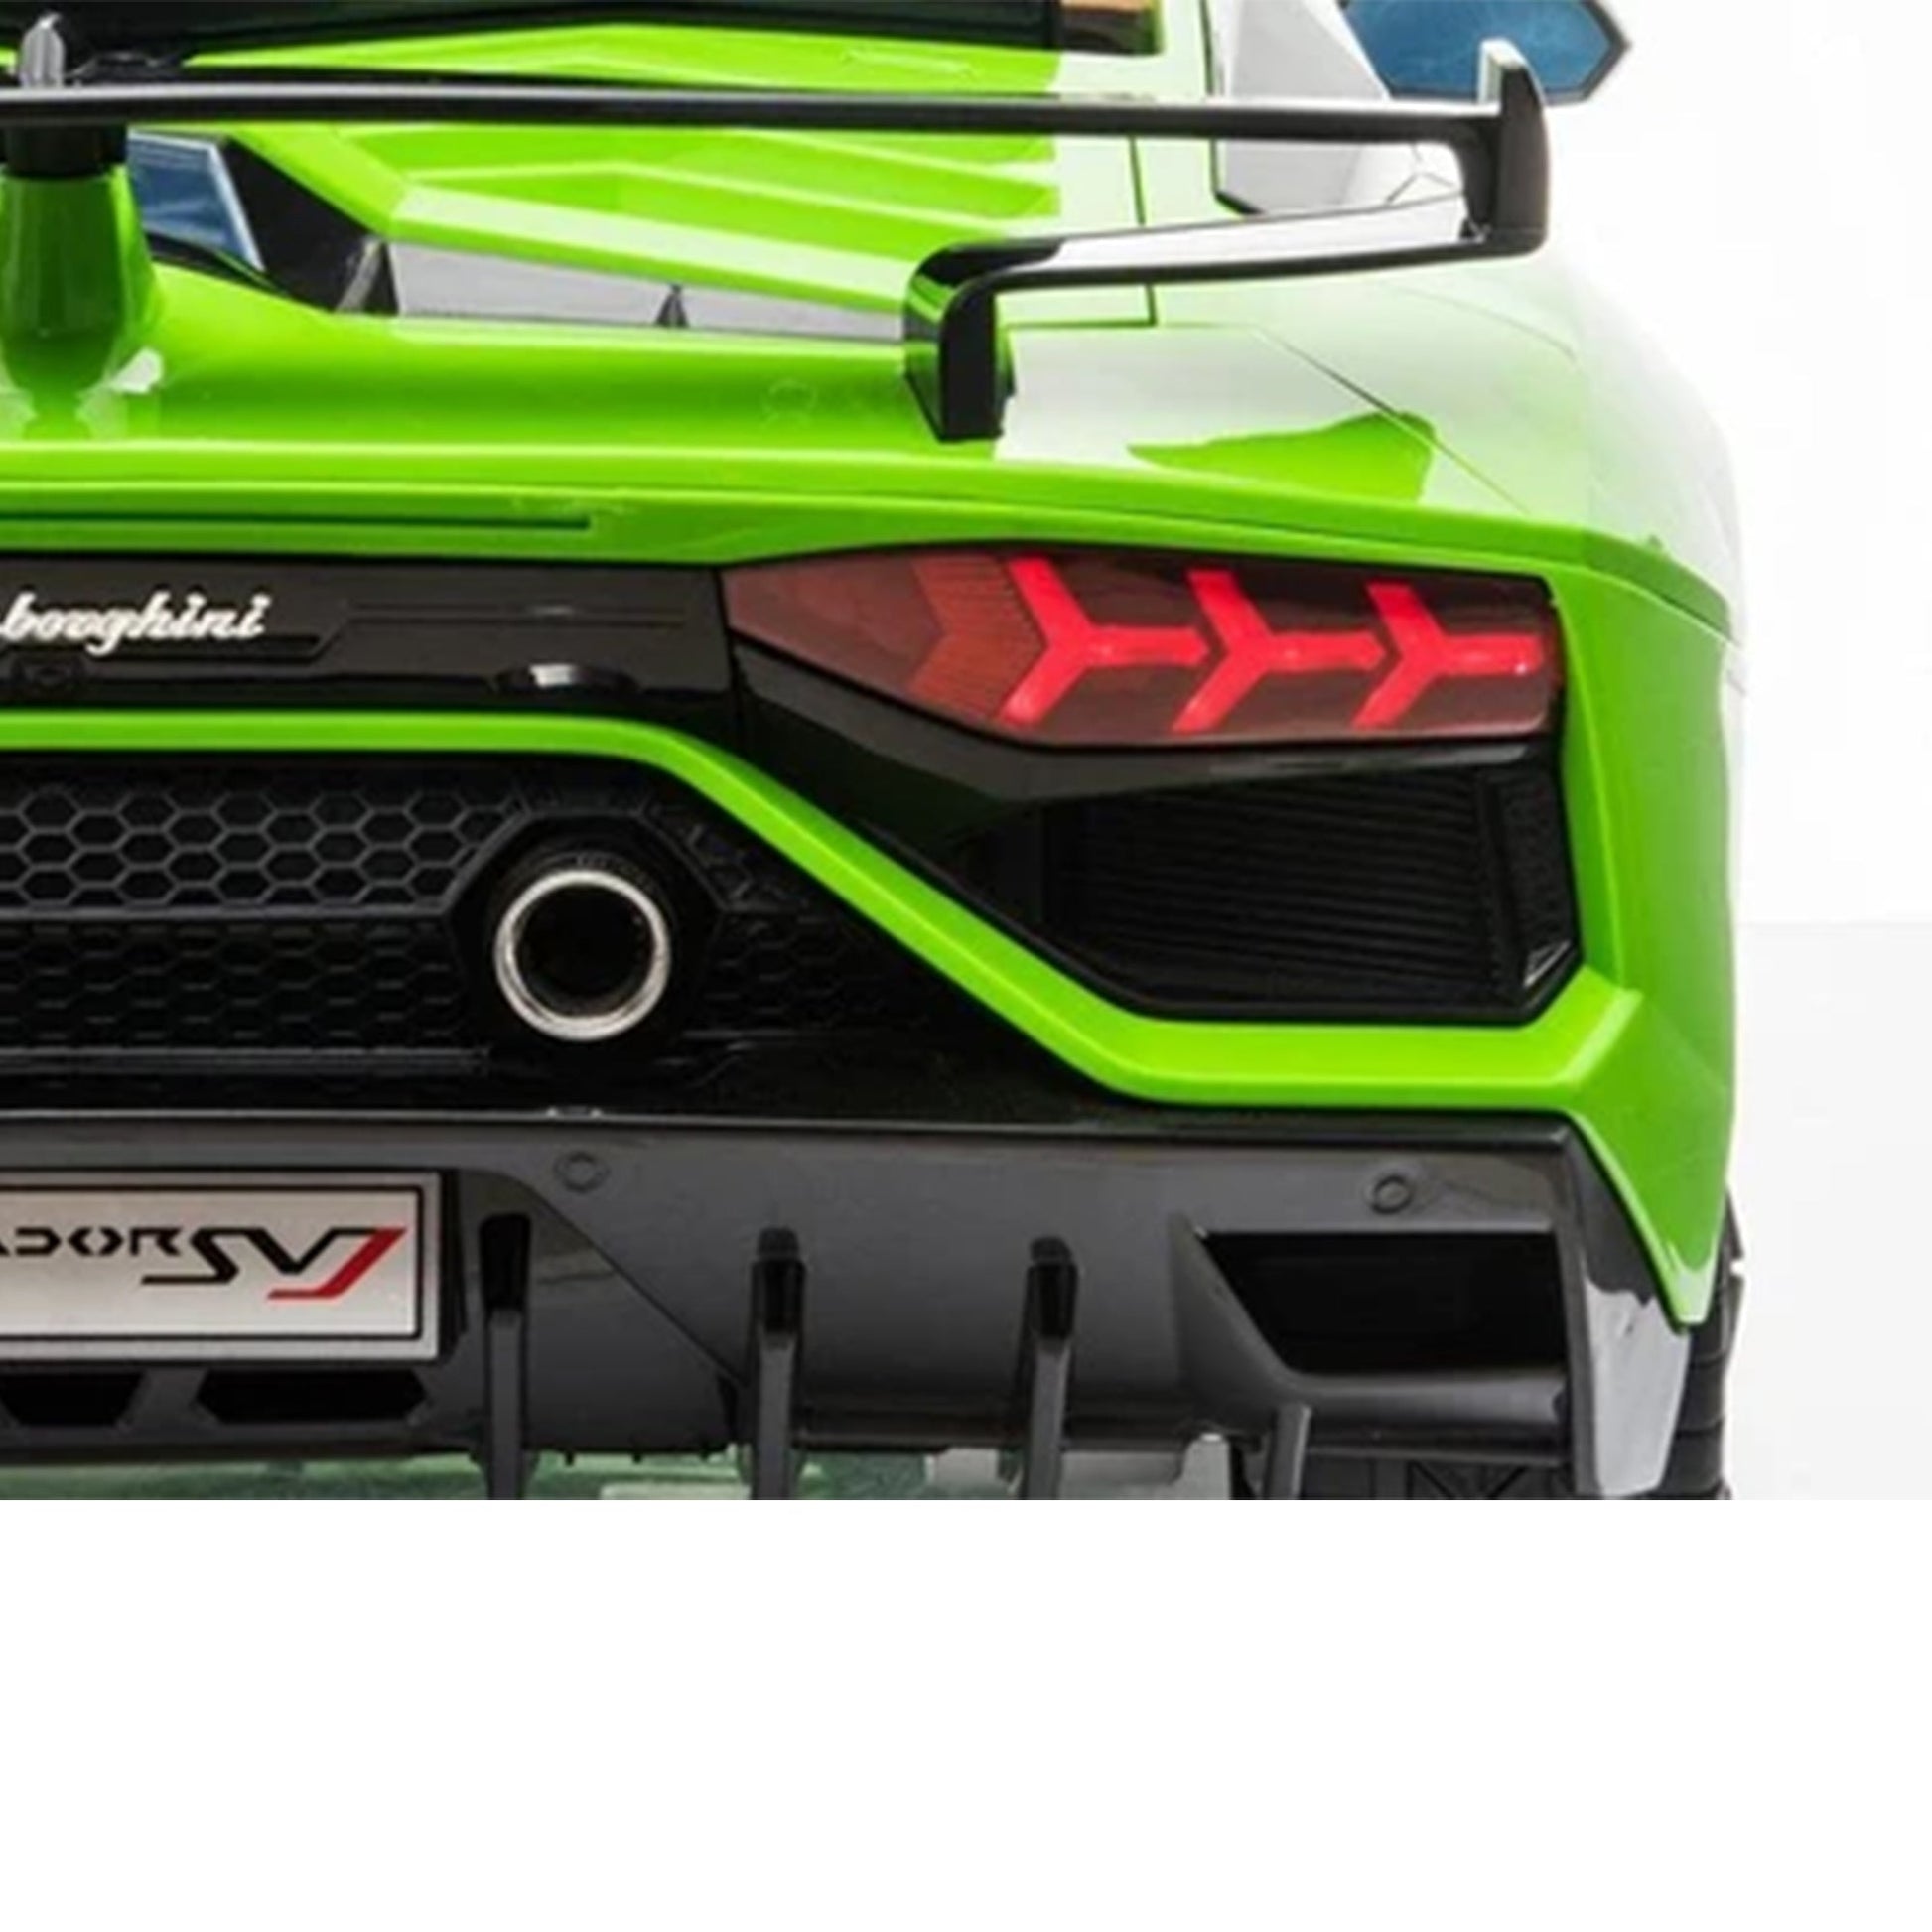 "Rear view of a green Lamborghini SVJ ride-on toy car with 2.4G parent remote from LAMBORGHINI available at Kids Car store"